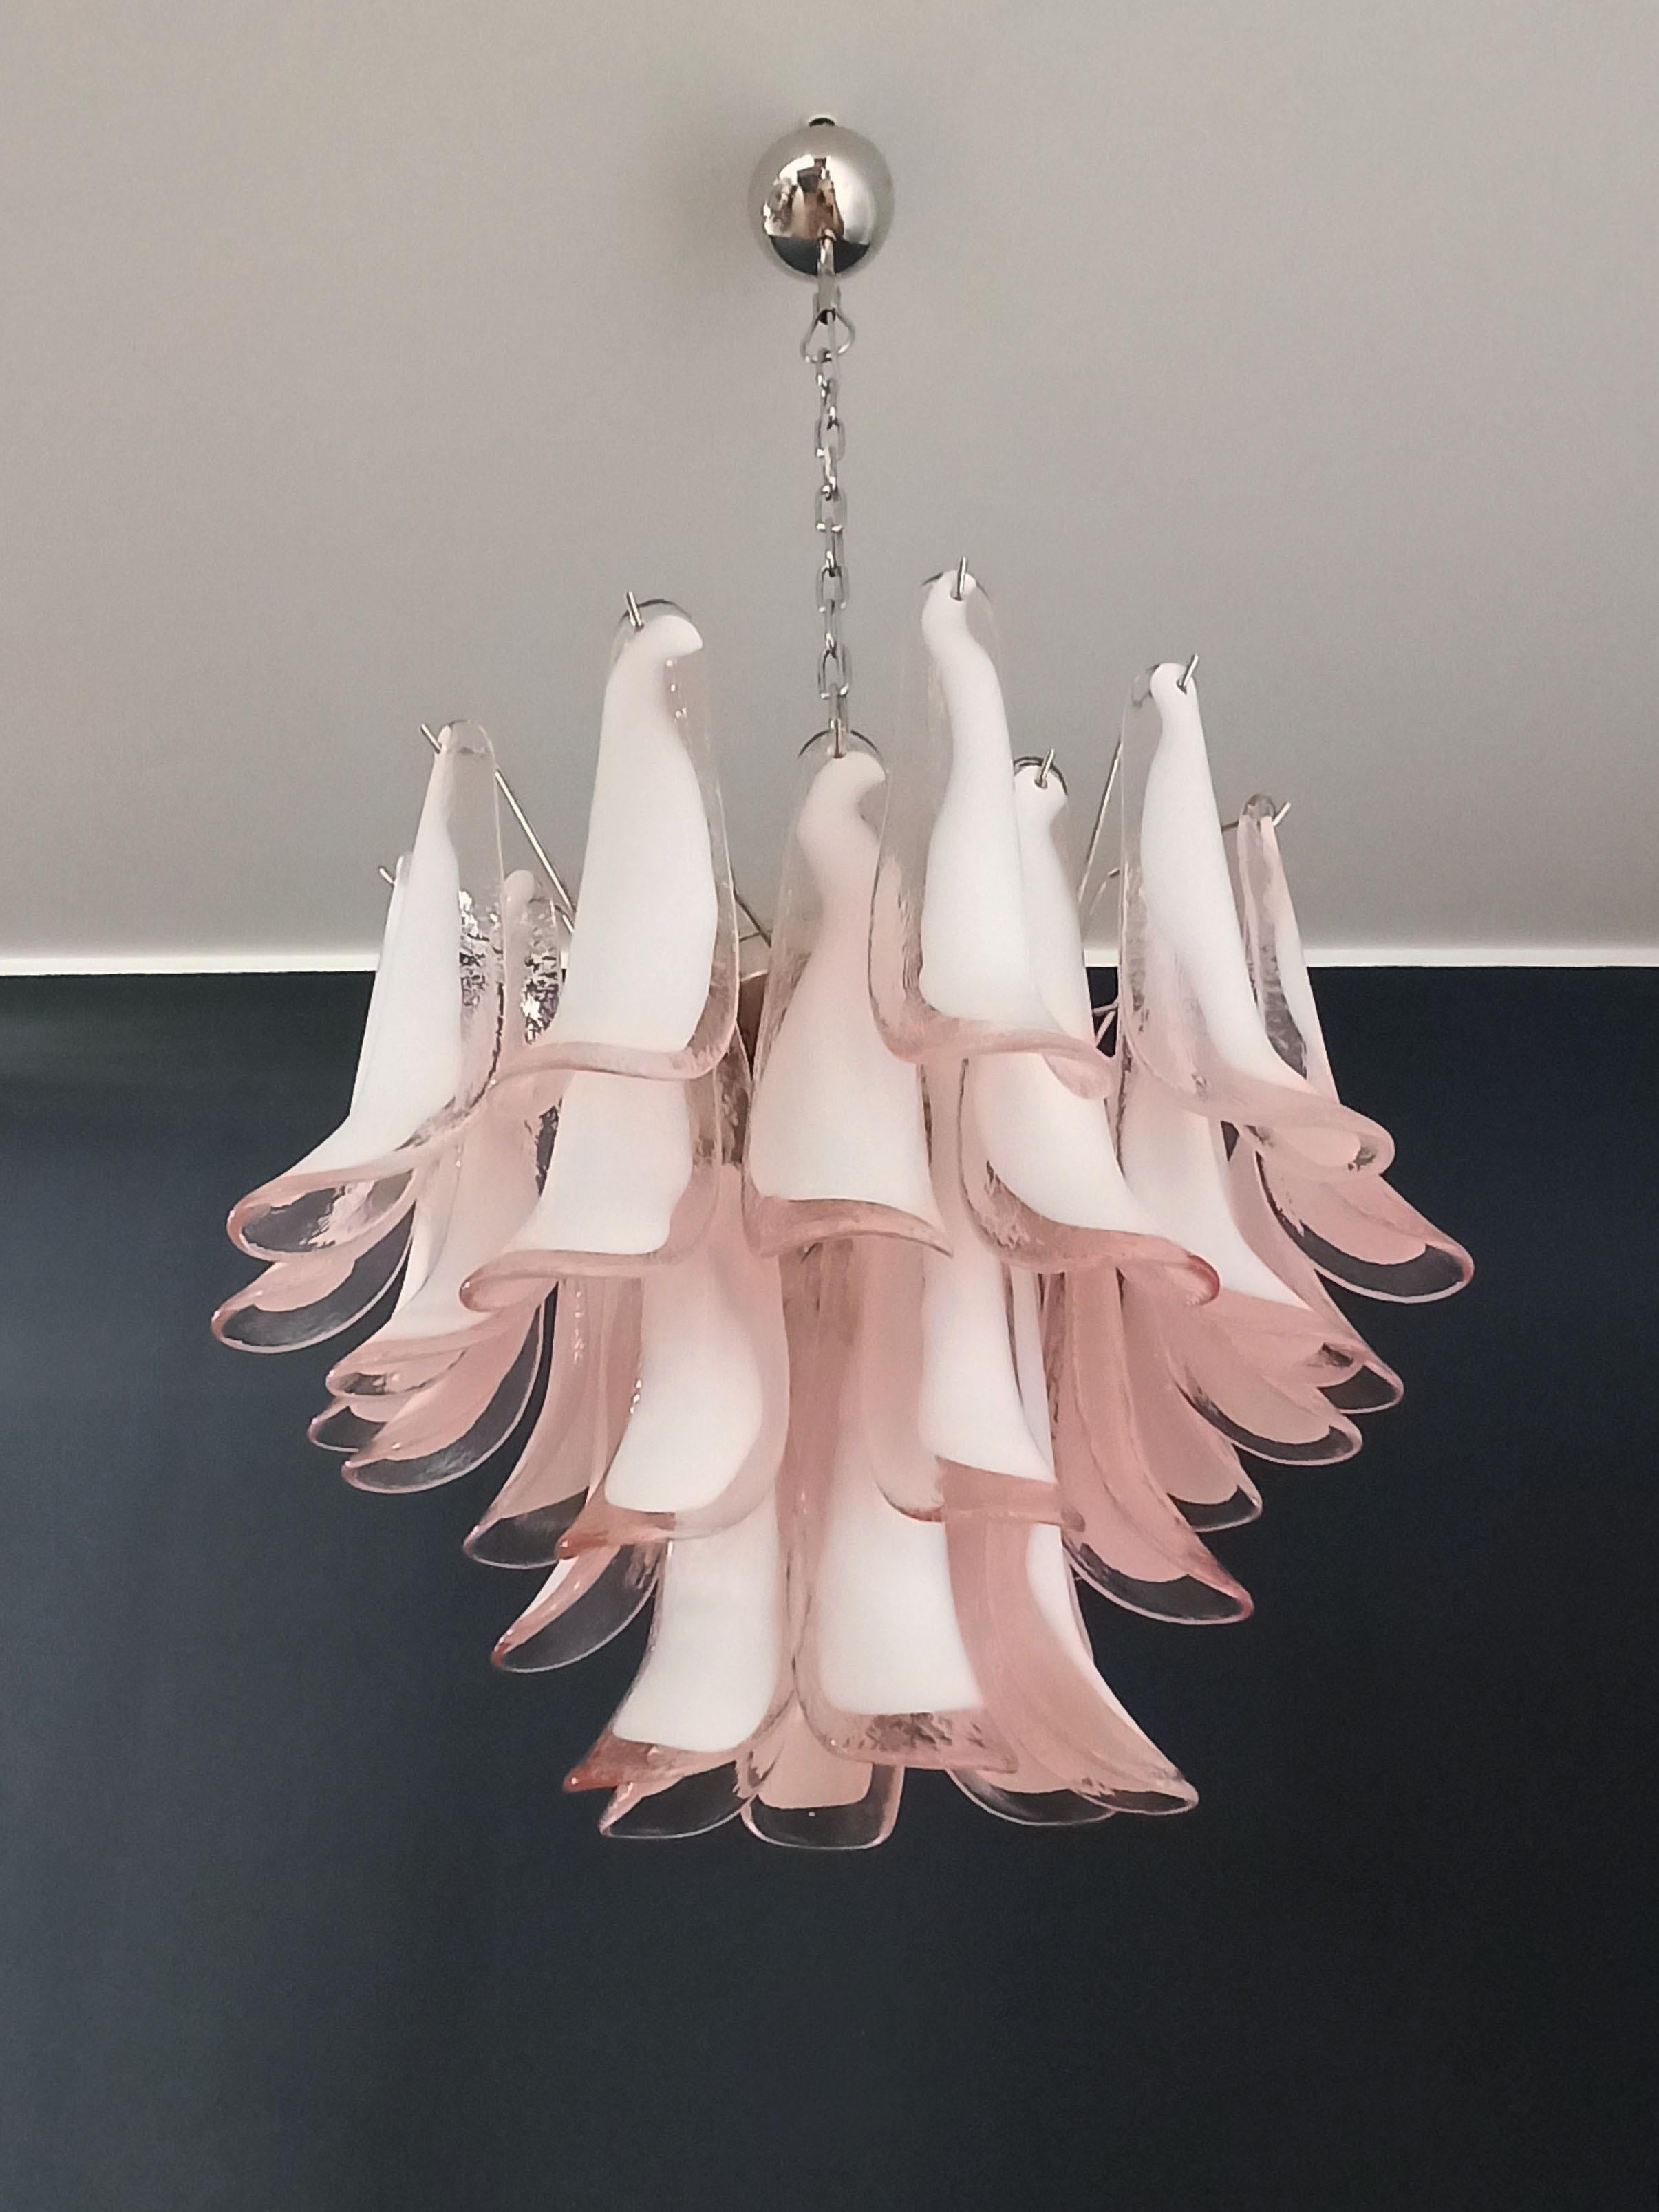 Murano Italian glass chandelier. Fantastic chandelier with pink and white “lattimo” glasses, nickel-plated metal frame. It has 36 big monumental petals glass. The glasses are very high quality, the photos do not do the beauty, luster of these